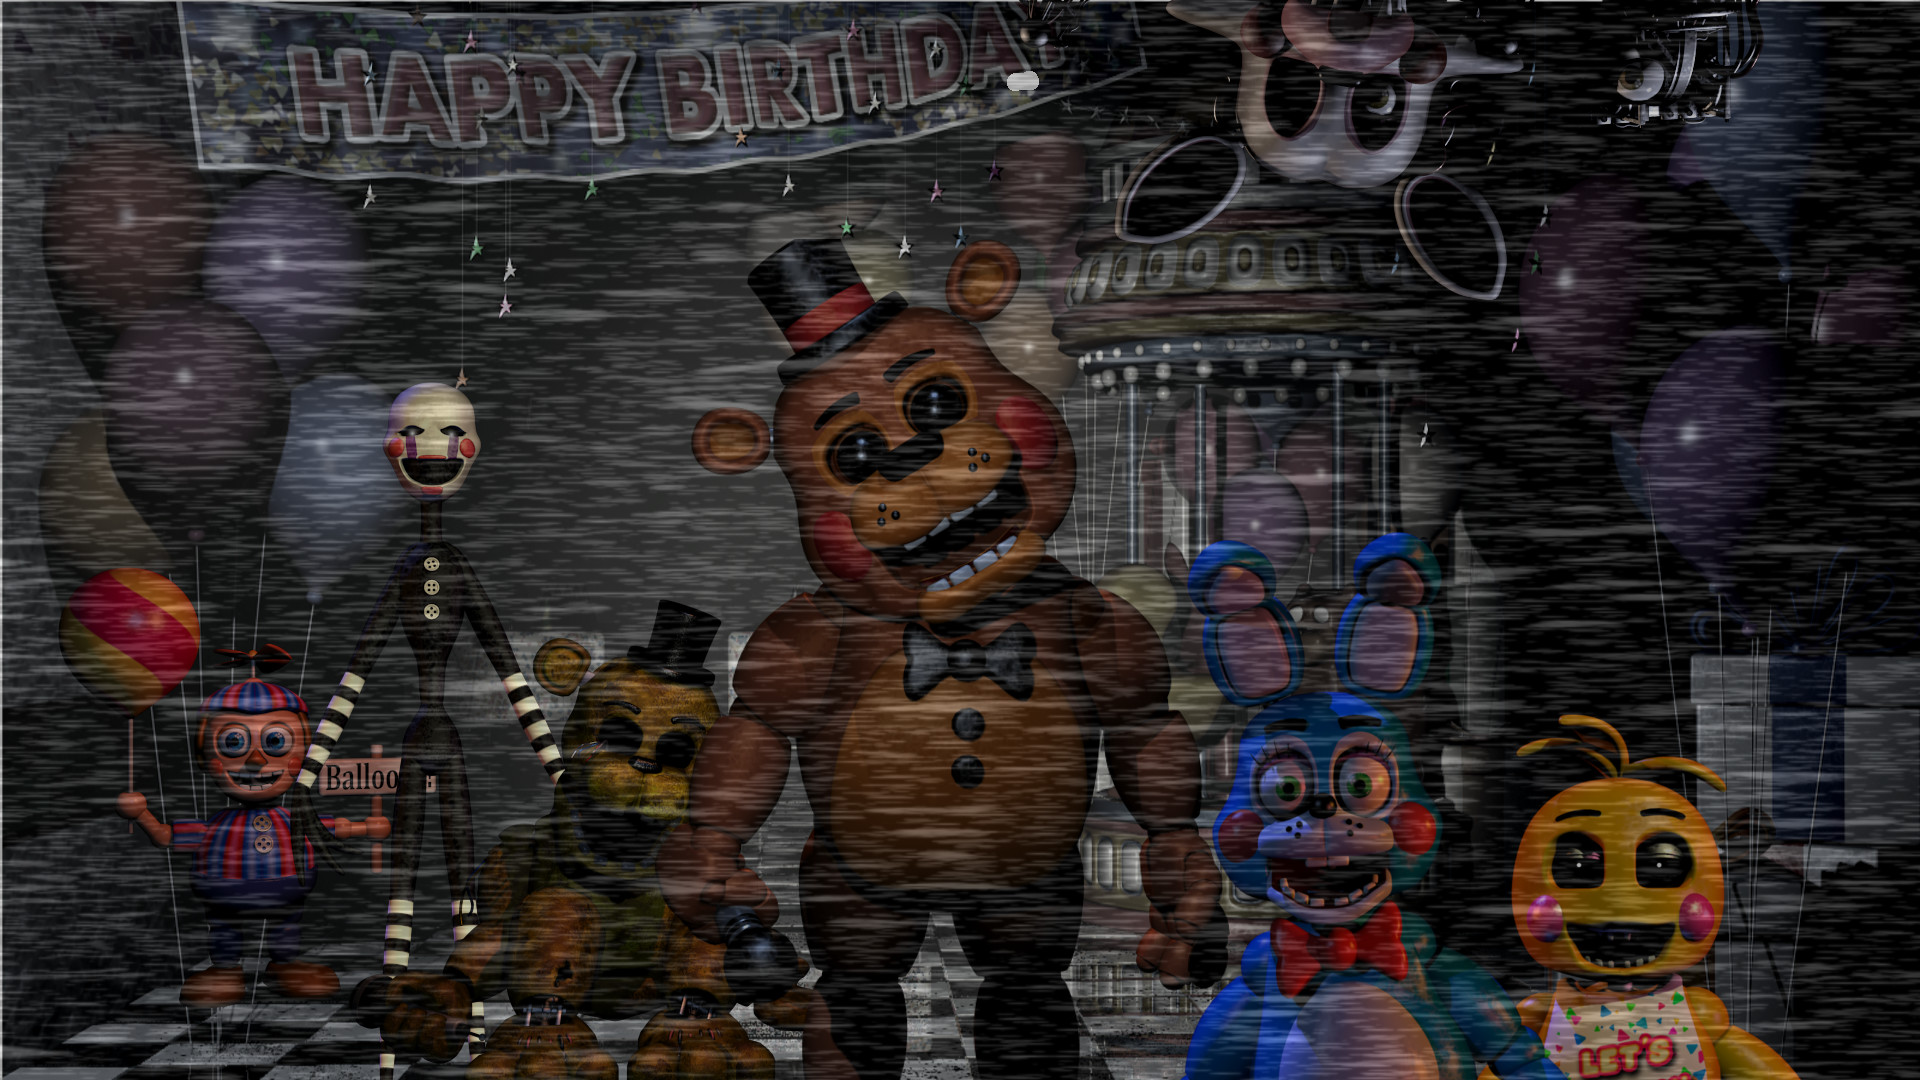 download five nights at freddys night 4